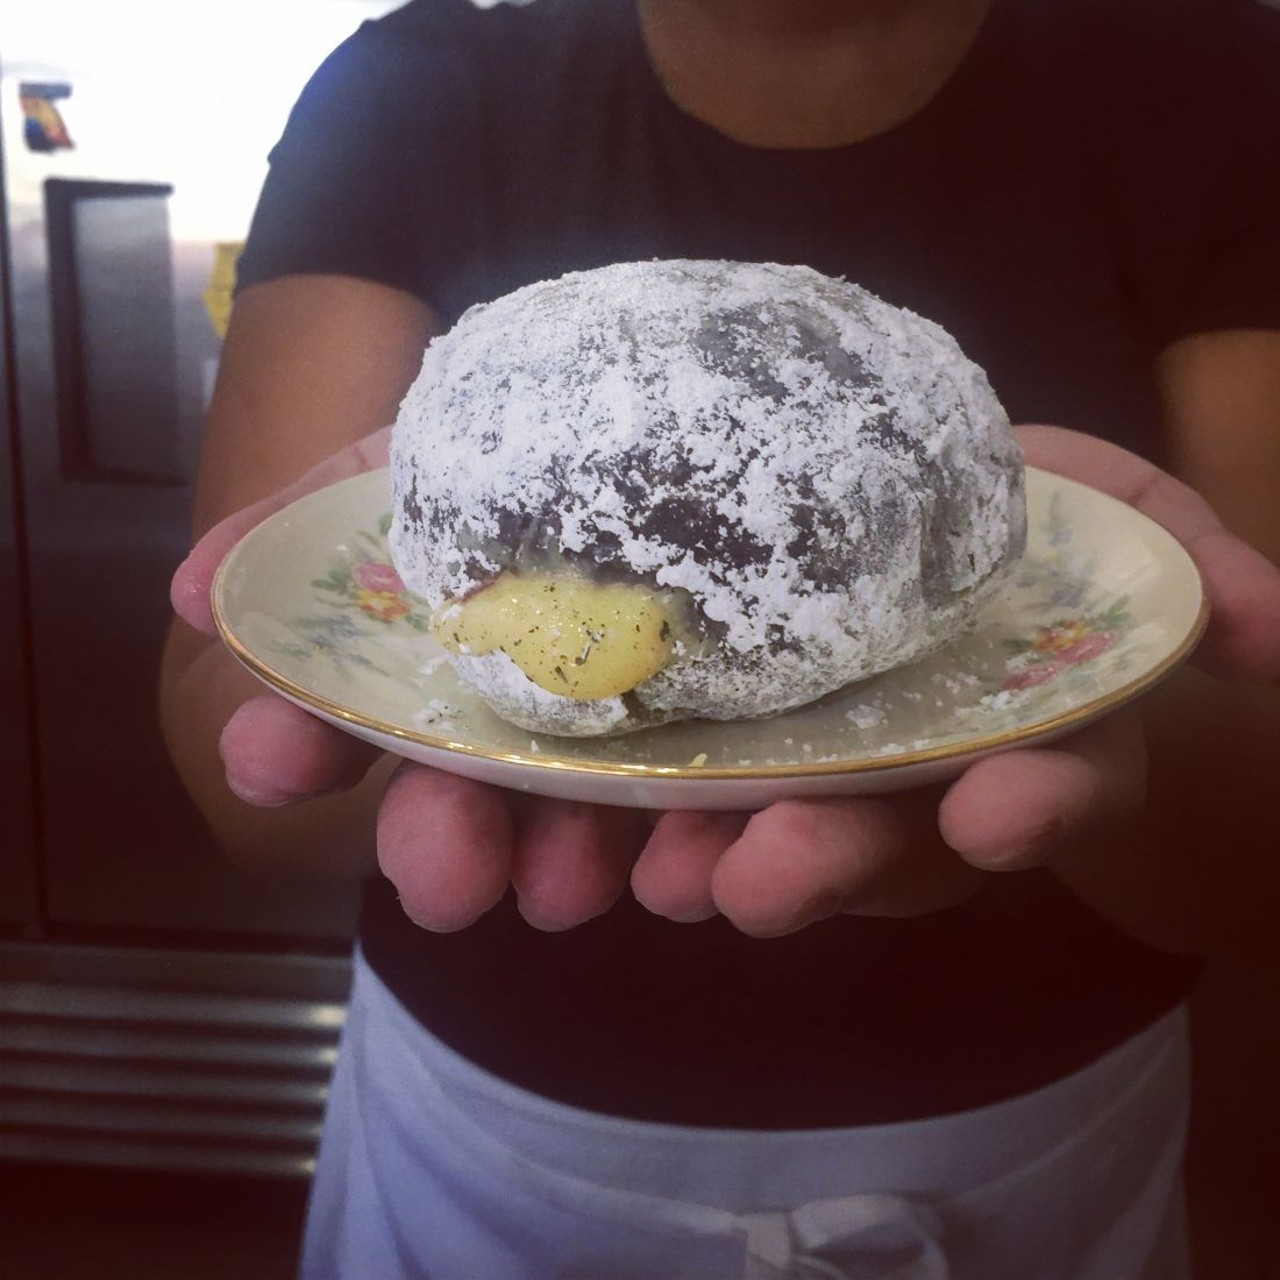 Sister Pie
Lisa Ludwinski&#146;s bakery will open at 7 a.m. on Fat Tuesday selling three creative takes on the traditional paczki: the jasmine passionfruit, the maple coffee cream, and the &#147;pieraczki,&#148; a savory ode to the Polish pierogi in paczki form. Yum!
8066 Kercheval Ave, Detroit; 313-447-5550. Courtesy photo.